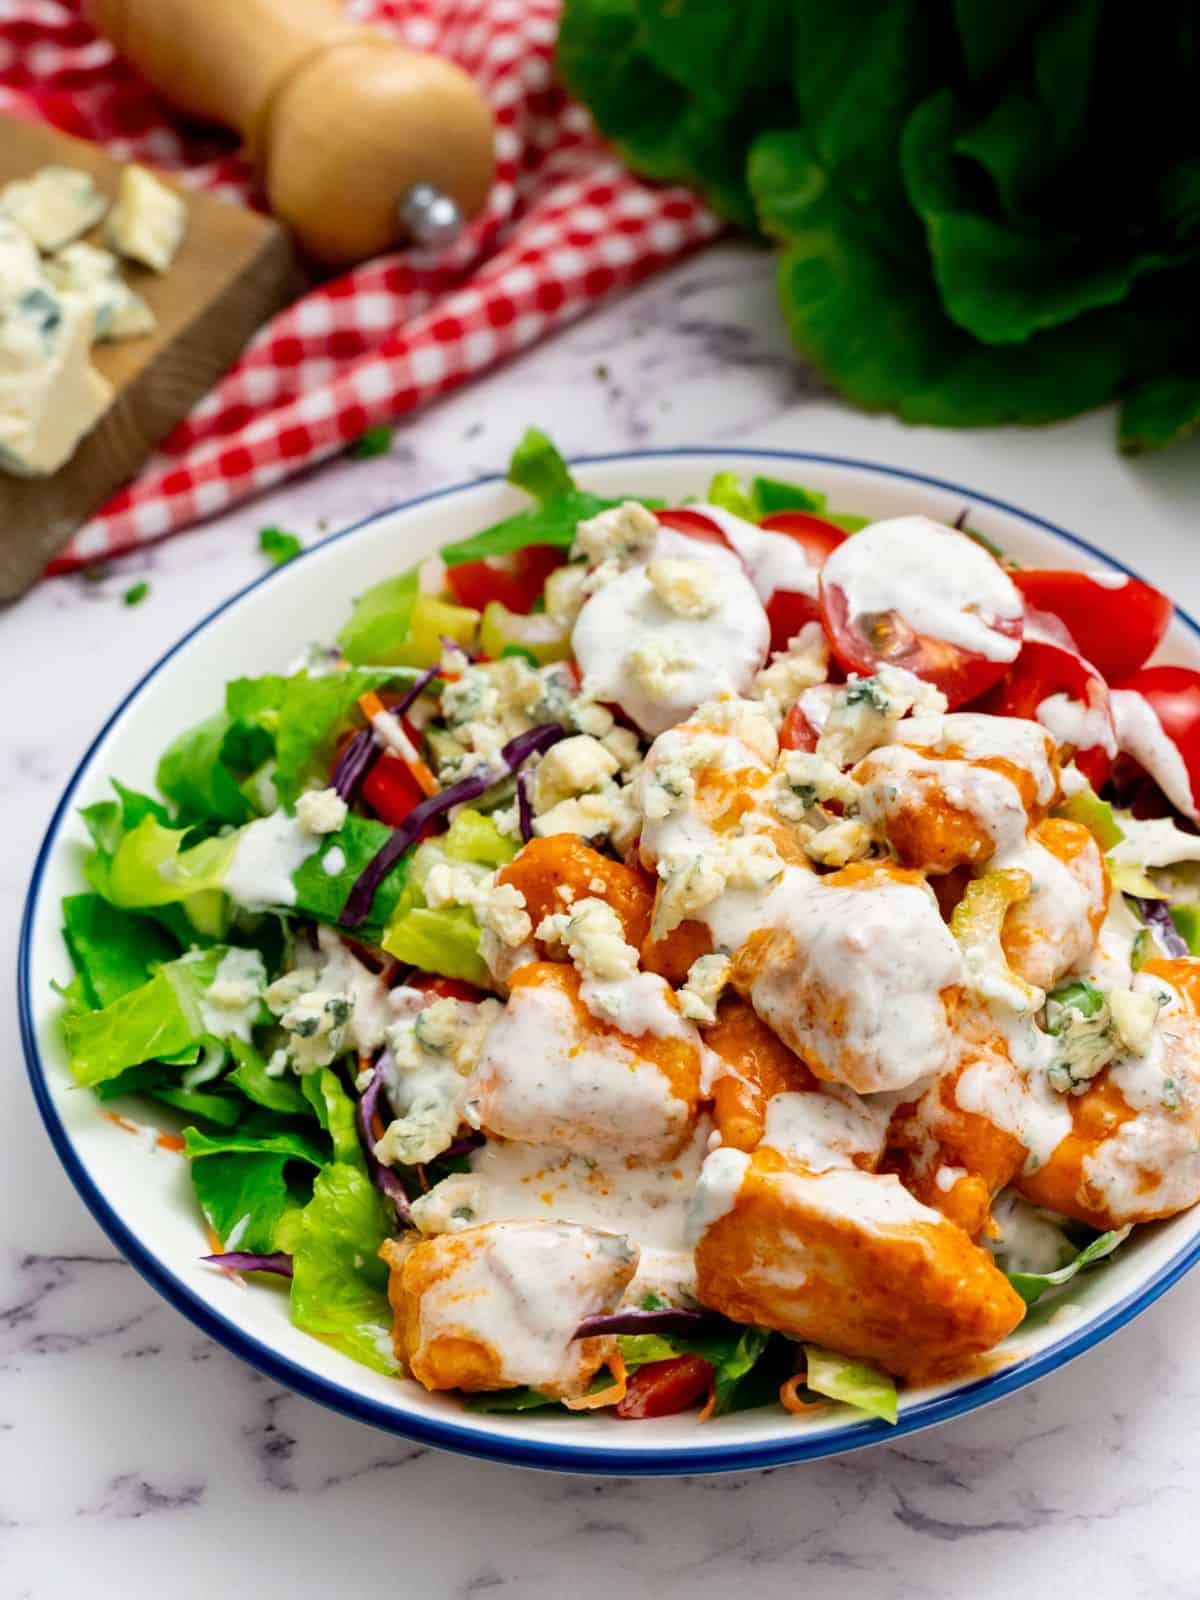 Bufflalo Chicken Salad with creamy ranch dressing plated in large bowl.